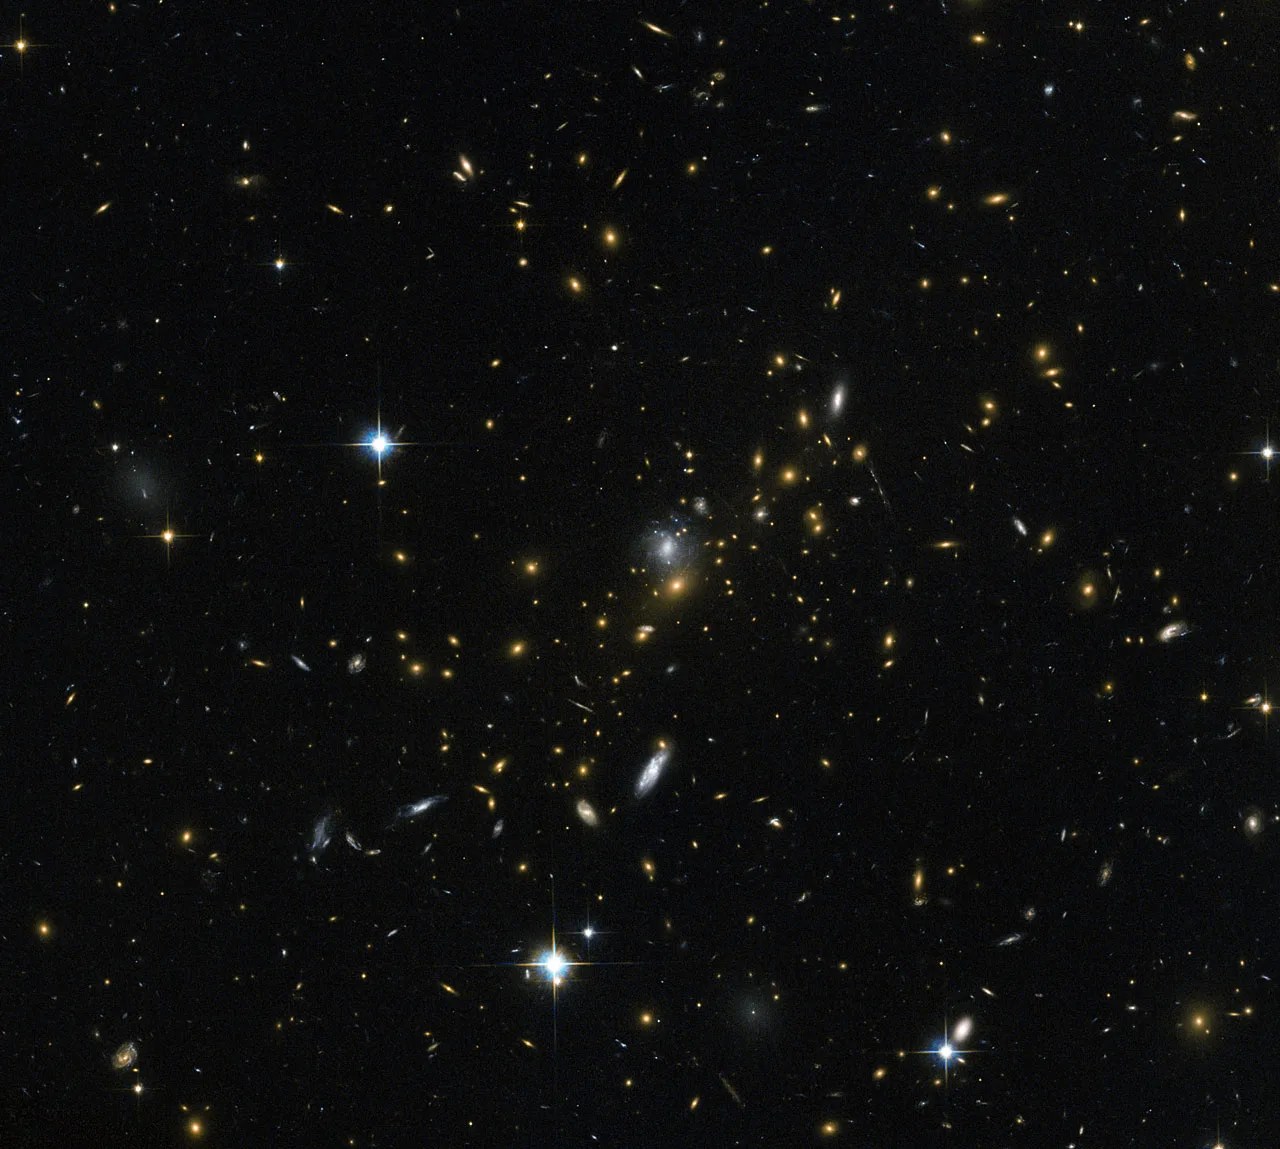 Stars and galaxies mingle in a clump